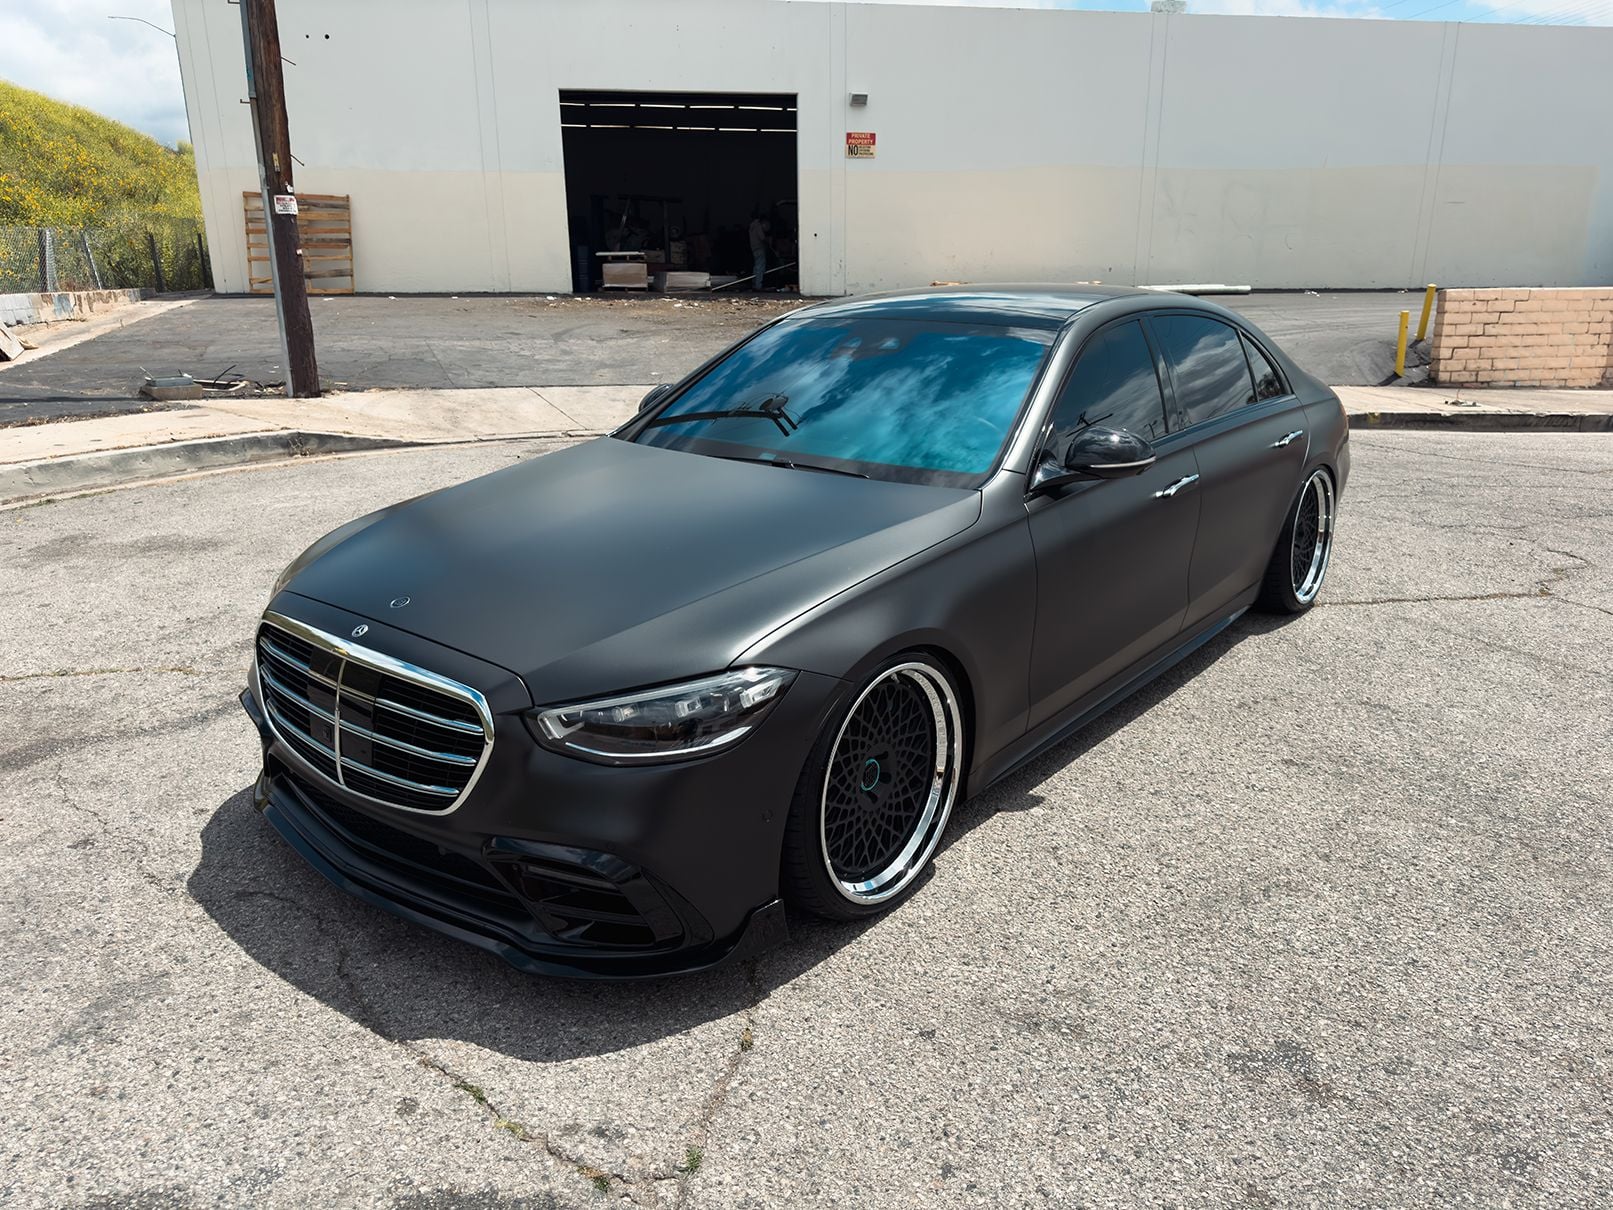 2023 Mercedes-Benz S-Class - BRABUS MERCEDES BENZ S500 FOR SALE W/ XPEL STEALTH FULL WRAP - Used - VIN W1K6G6DB4PA218182 - 10,800 Miles - 6 cyl - AWD - Automatic - Sedan - Other - Los Angeles, CA 91604, United States